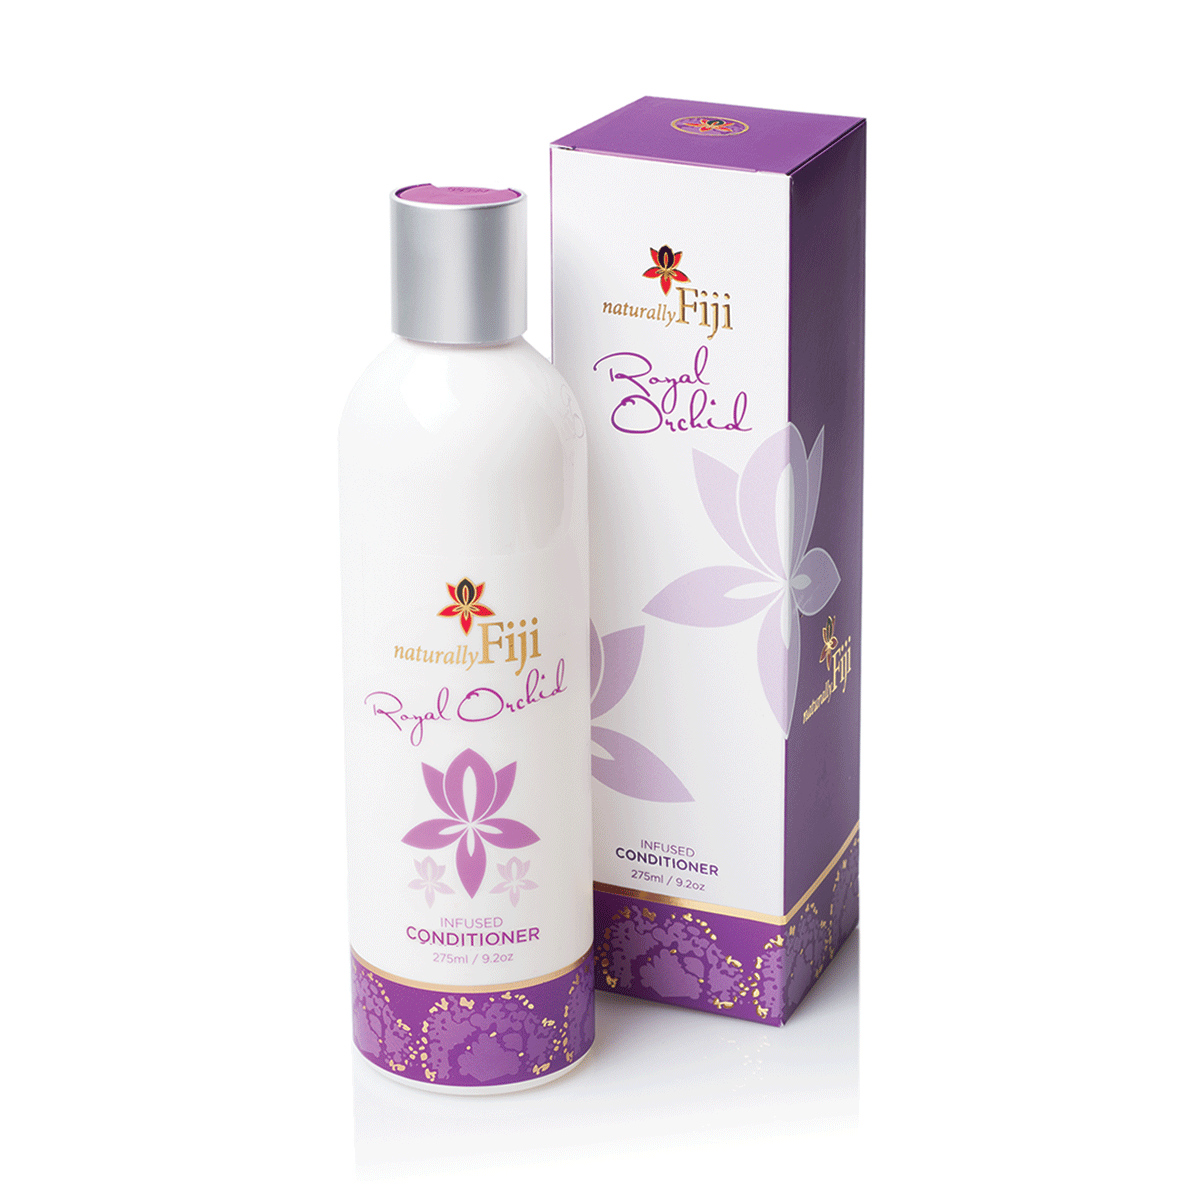 Royal Orchid Infused Conditioner